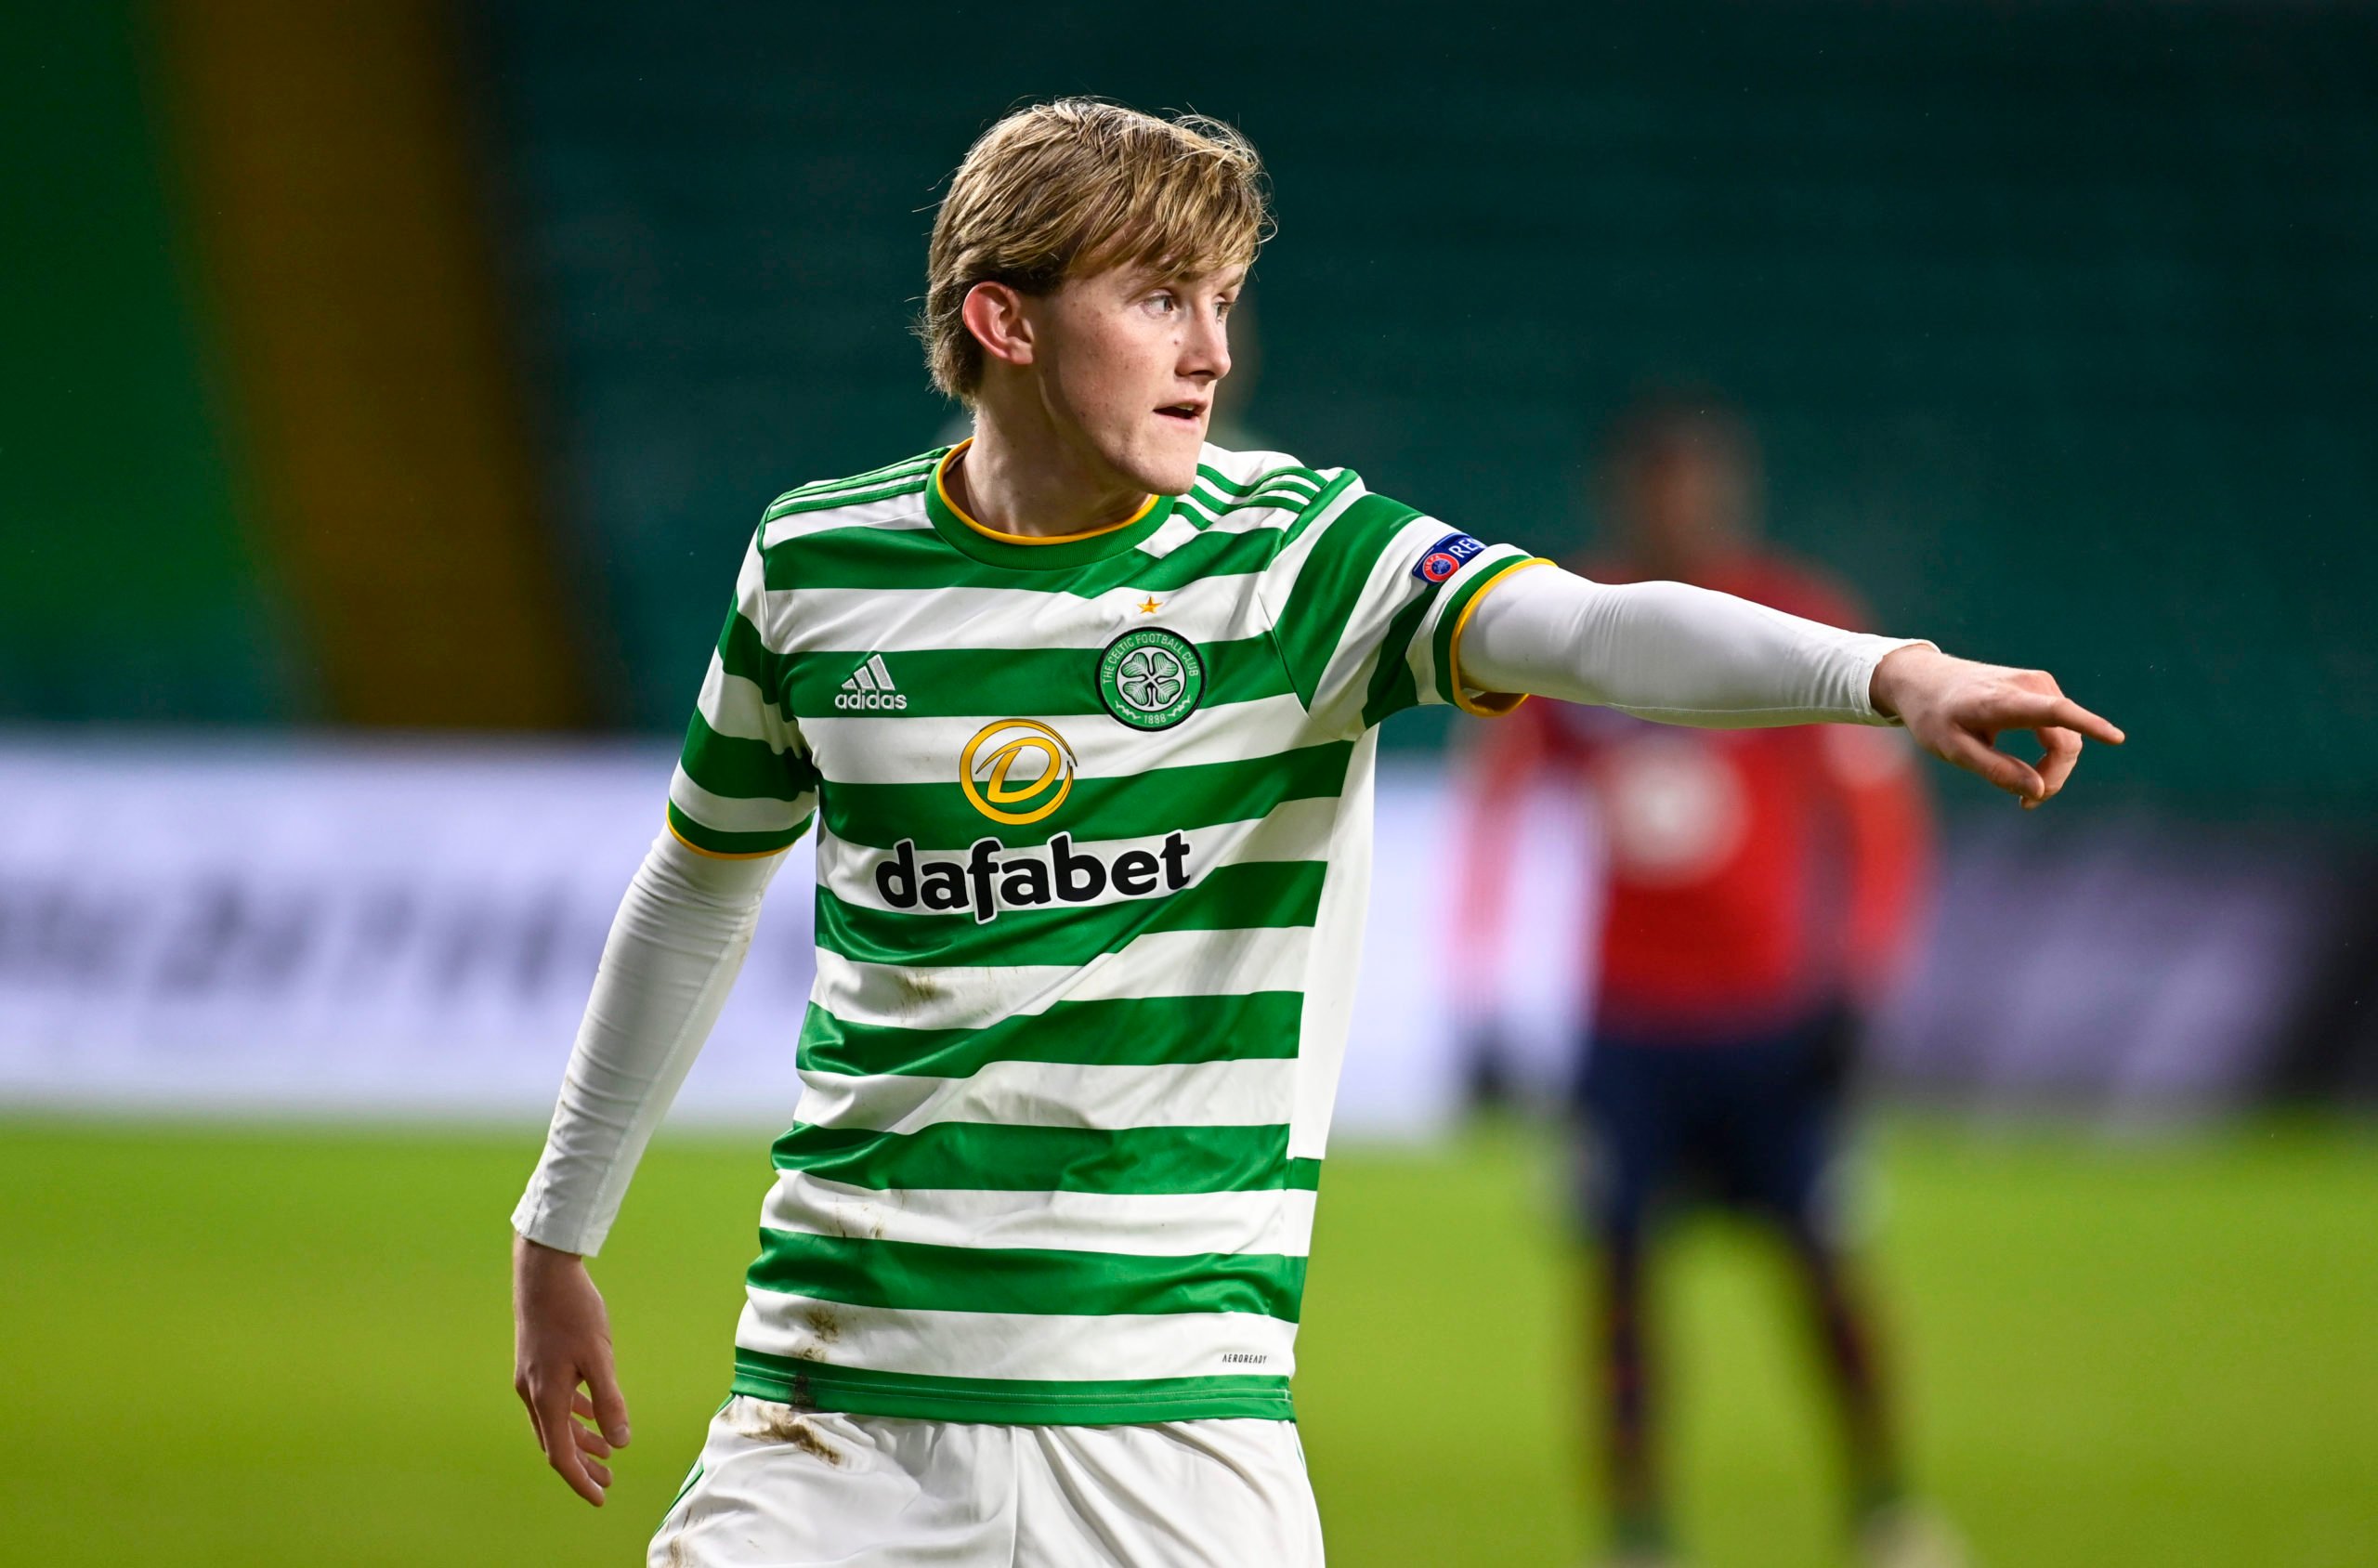 Celtic youngster Ewan Henderson adds "different dimension", says loan boss Crawford